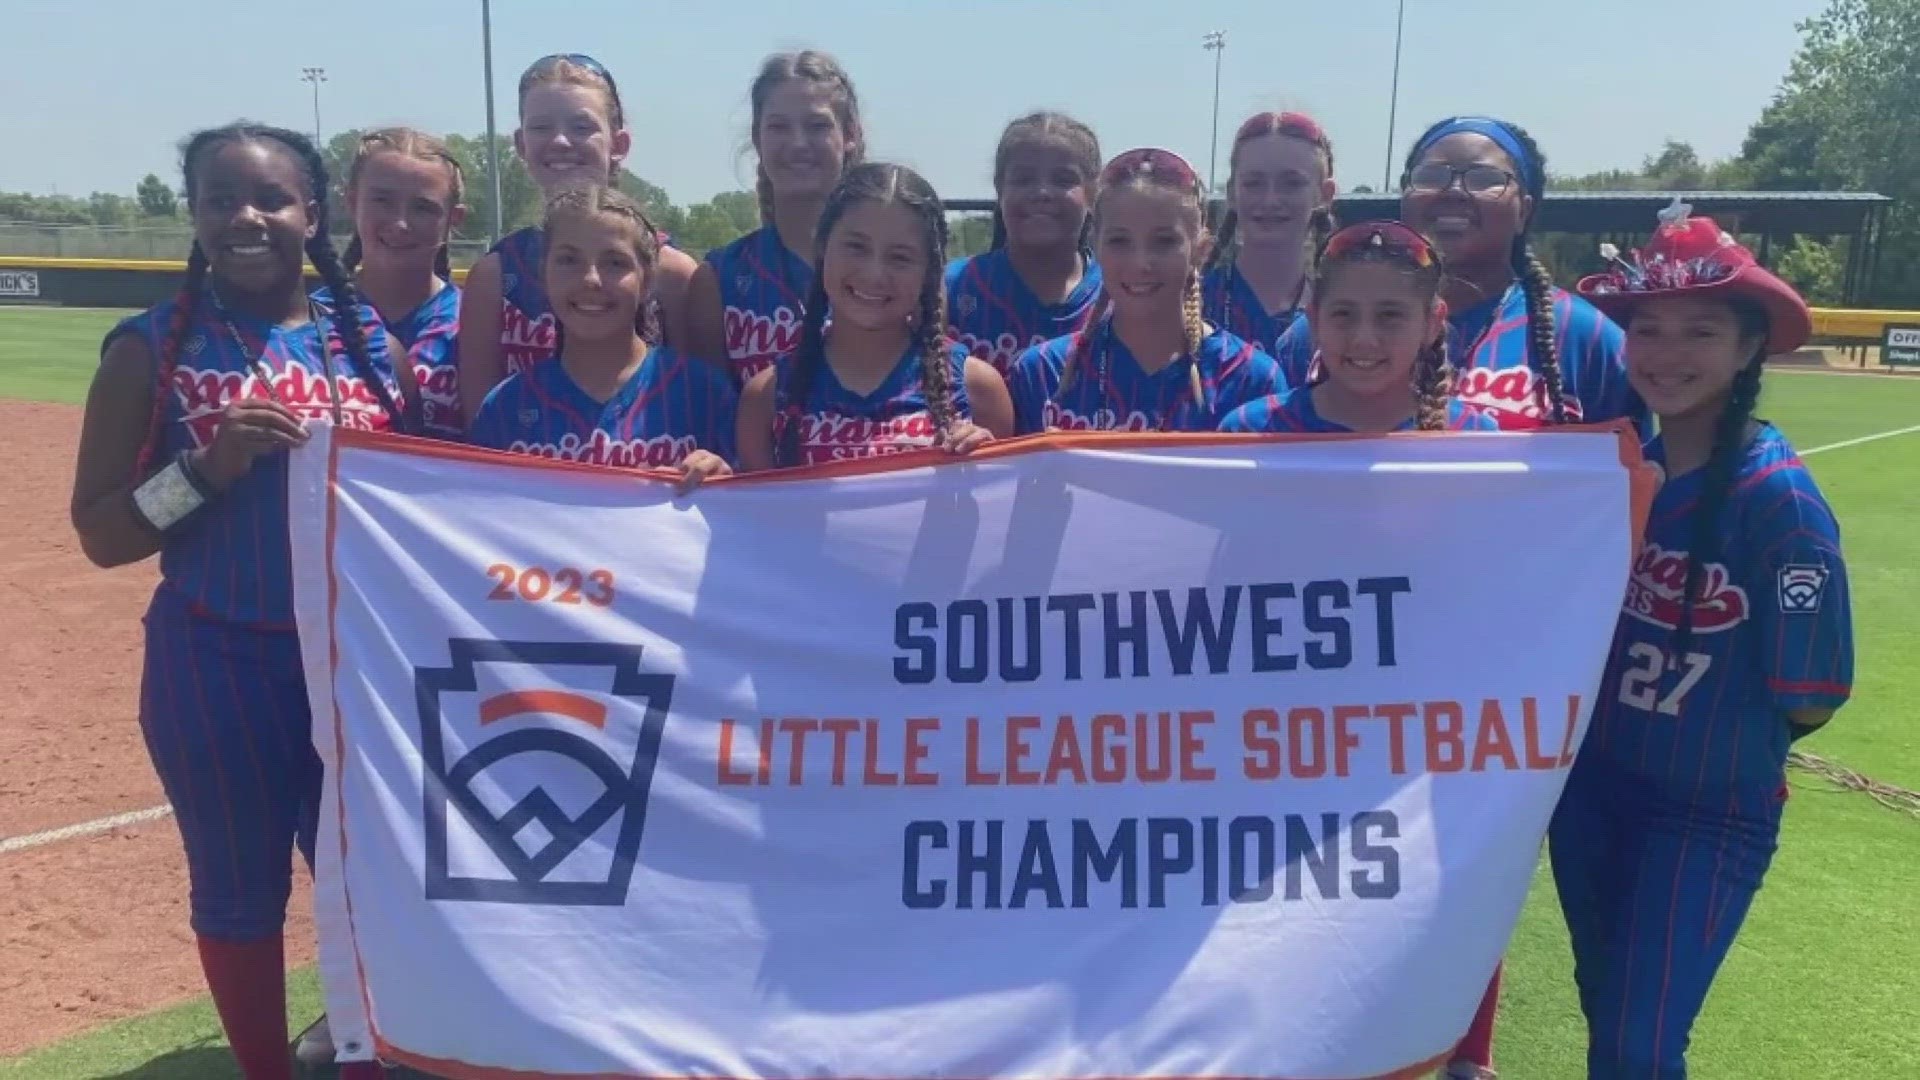 After shutting out Texas East on July 27, Midway Little League Softball is headed back to North Carolina to defend their World Series title.